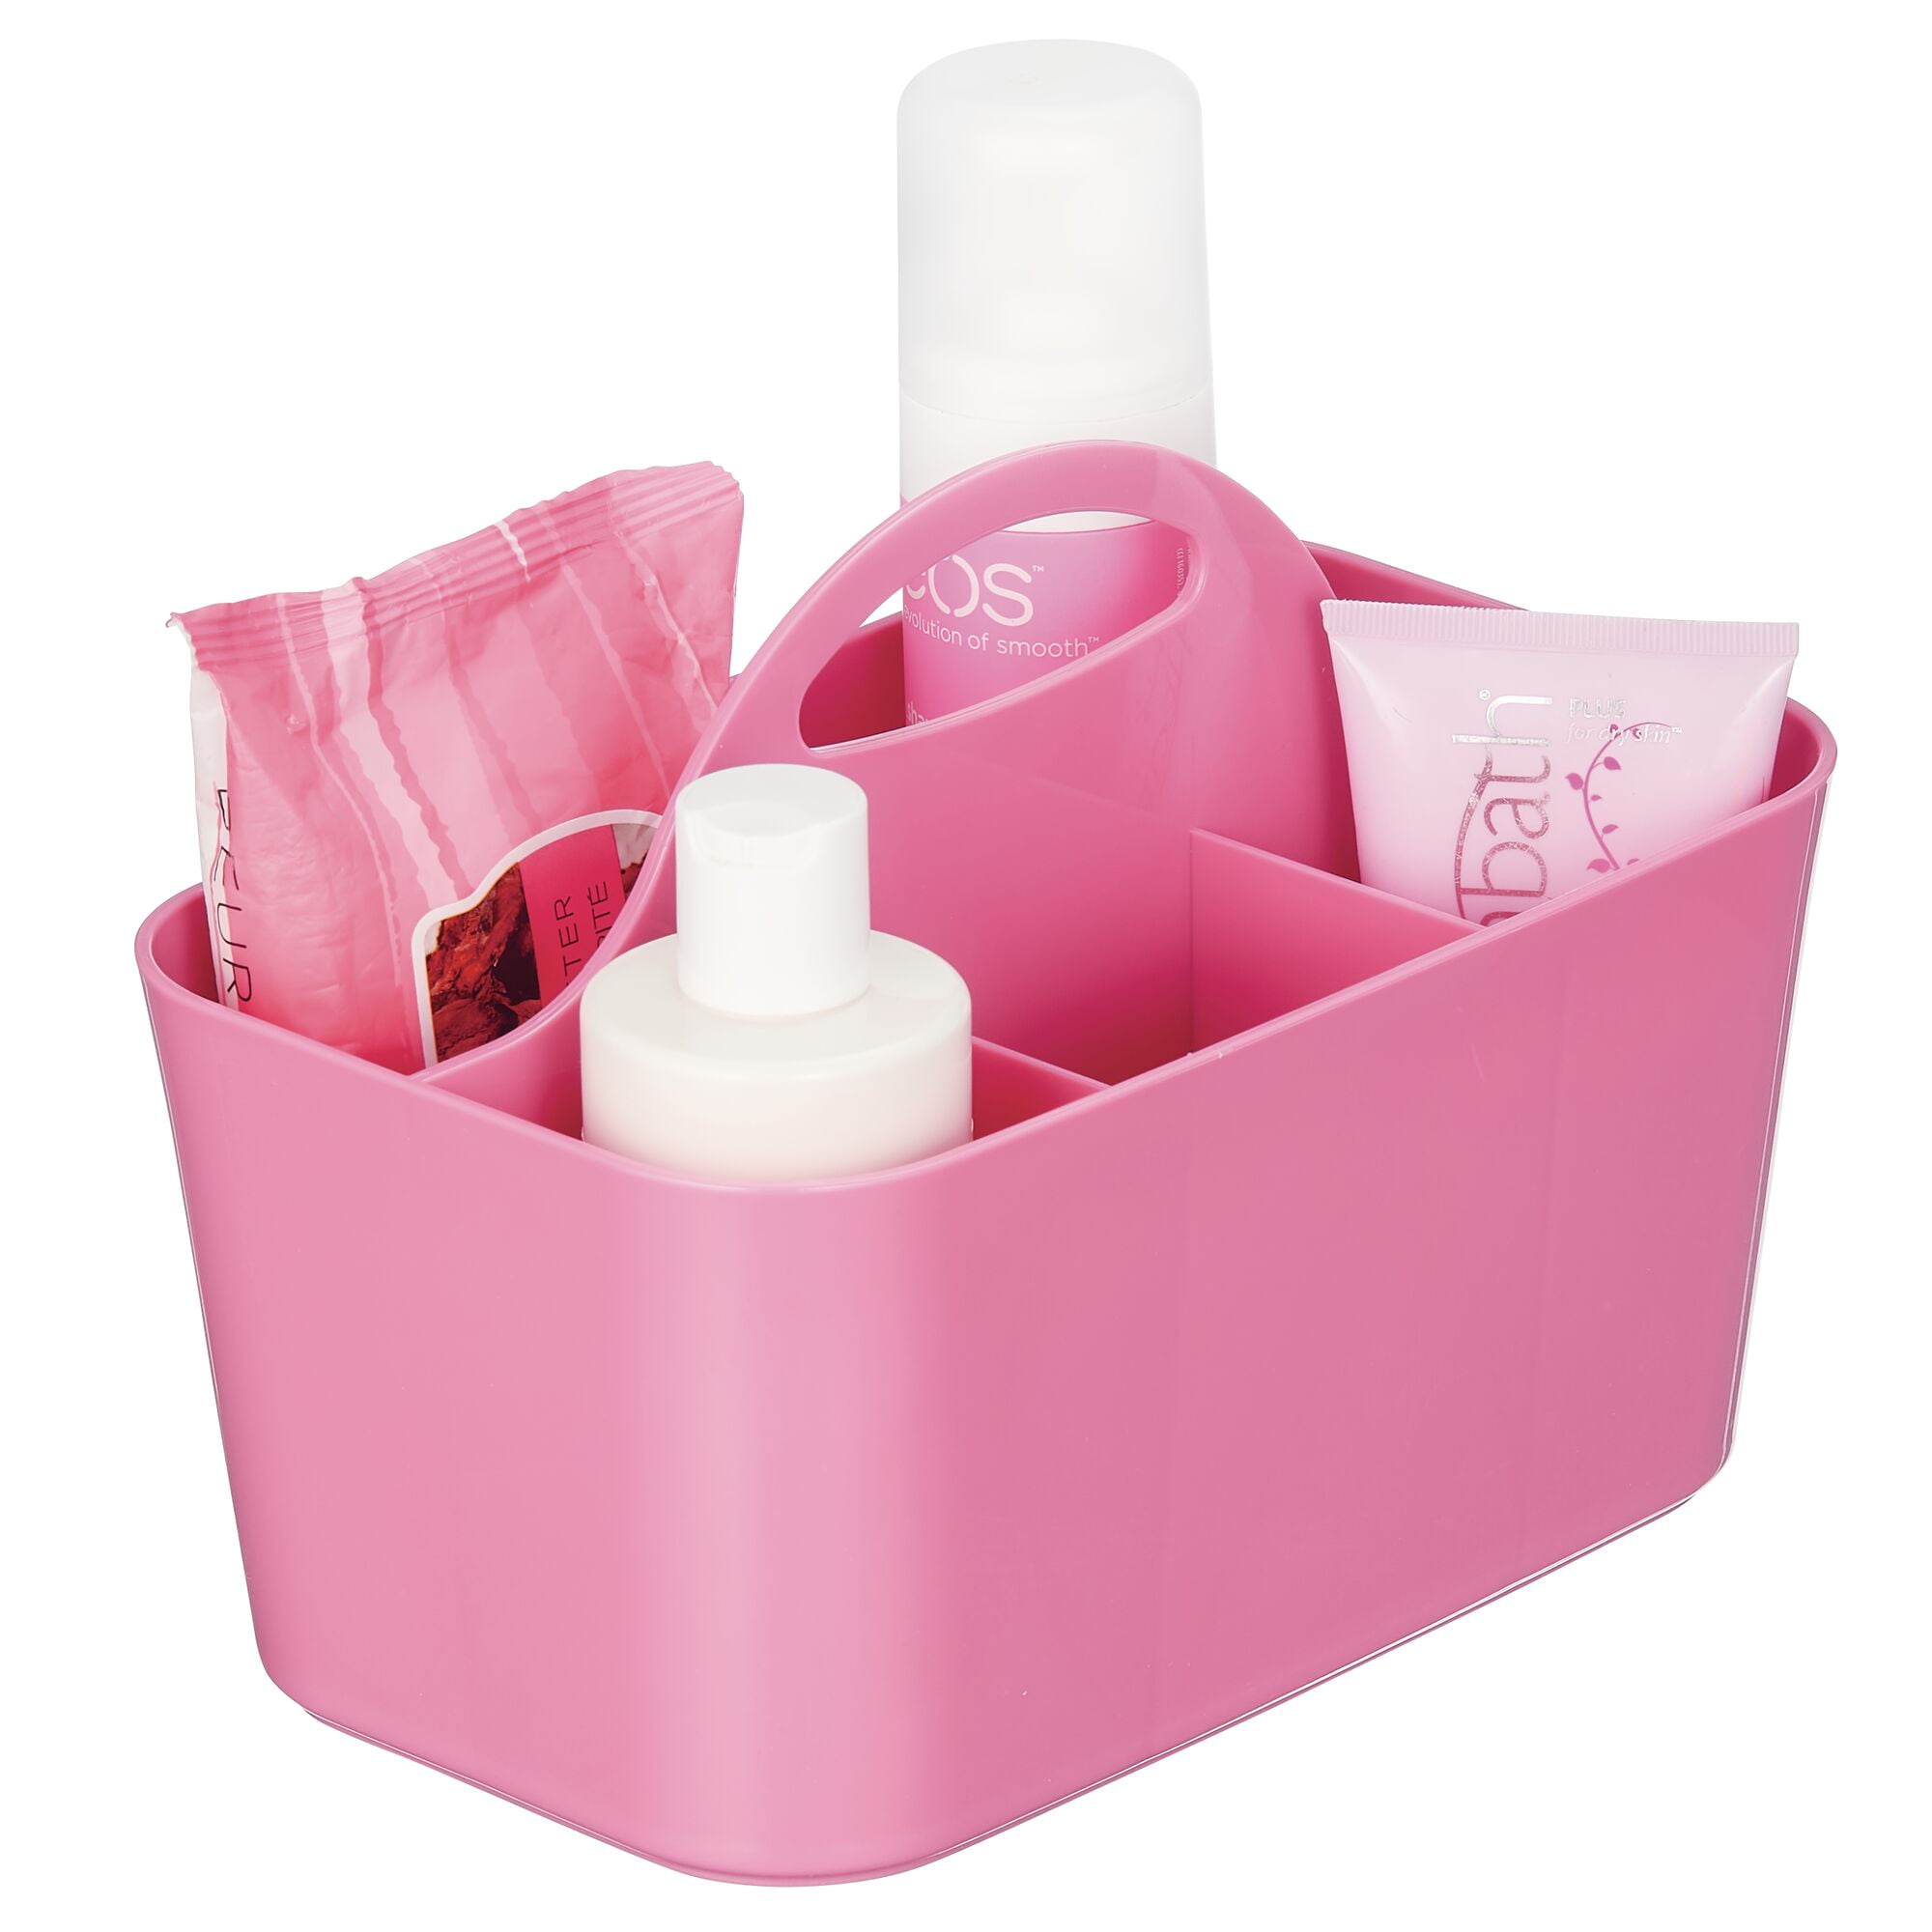 mDesign Plastic Portable Bathroom Shower Caddy Tote with Handle, Dark Pink Tint